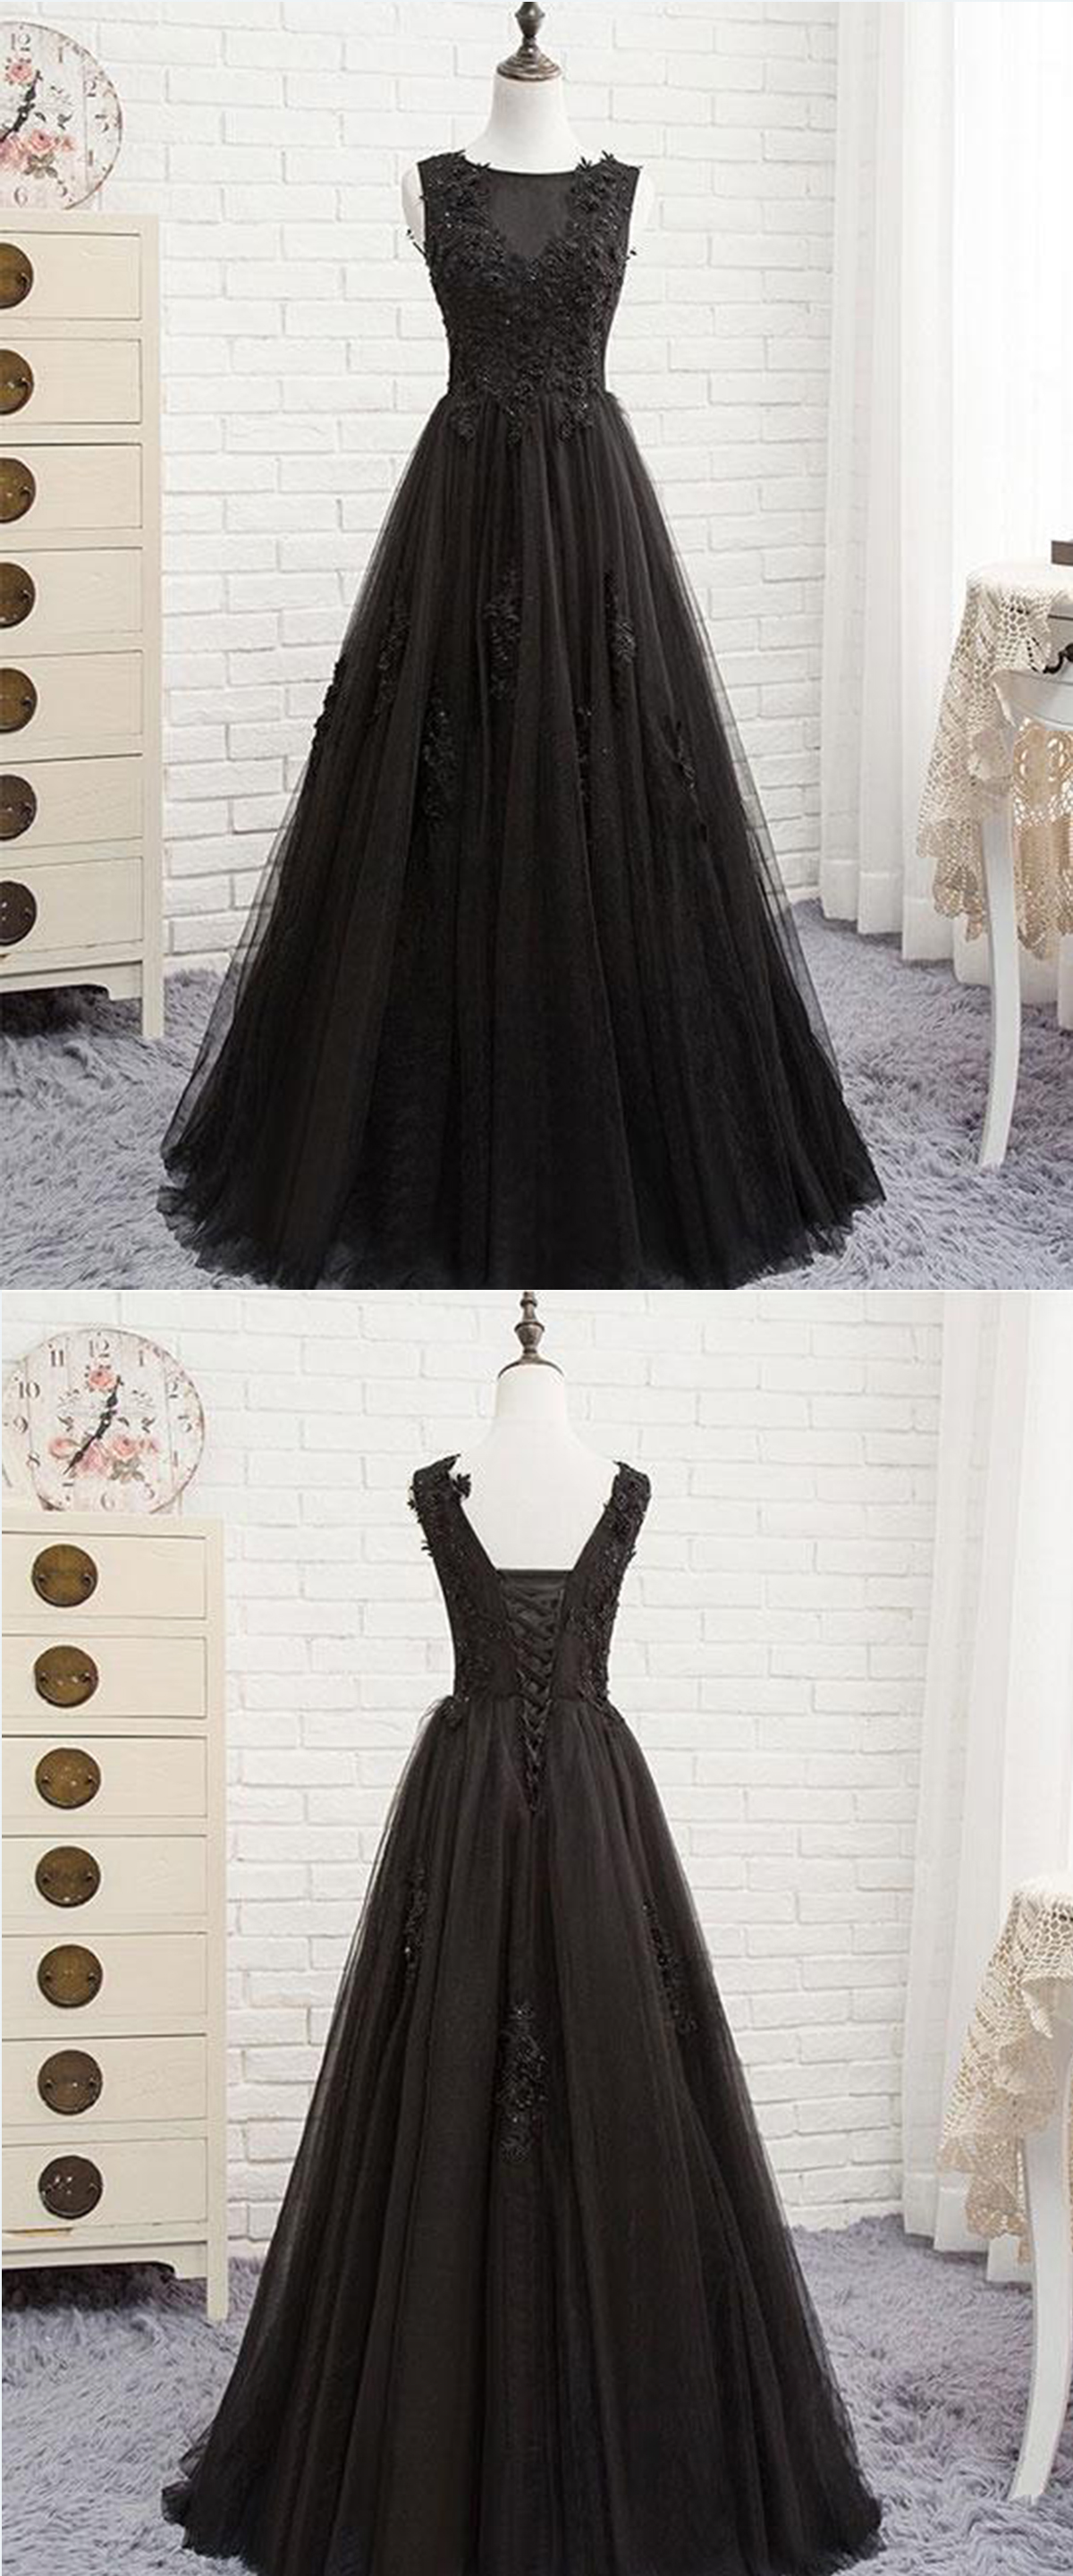 Black V-necl Lace Formal Evening Dresses A Line Prom Dress , Black Prom Gowns Long